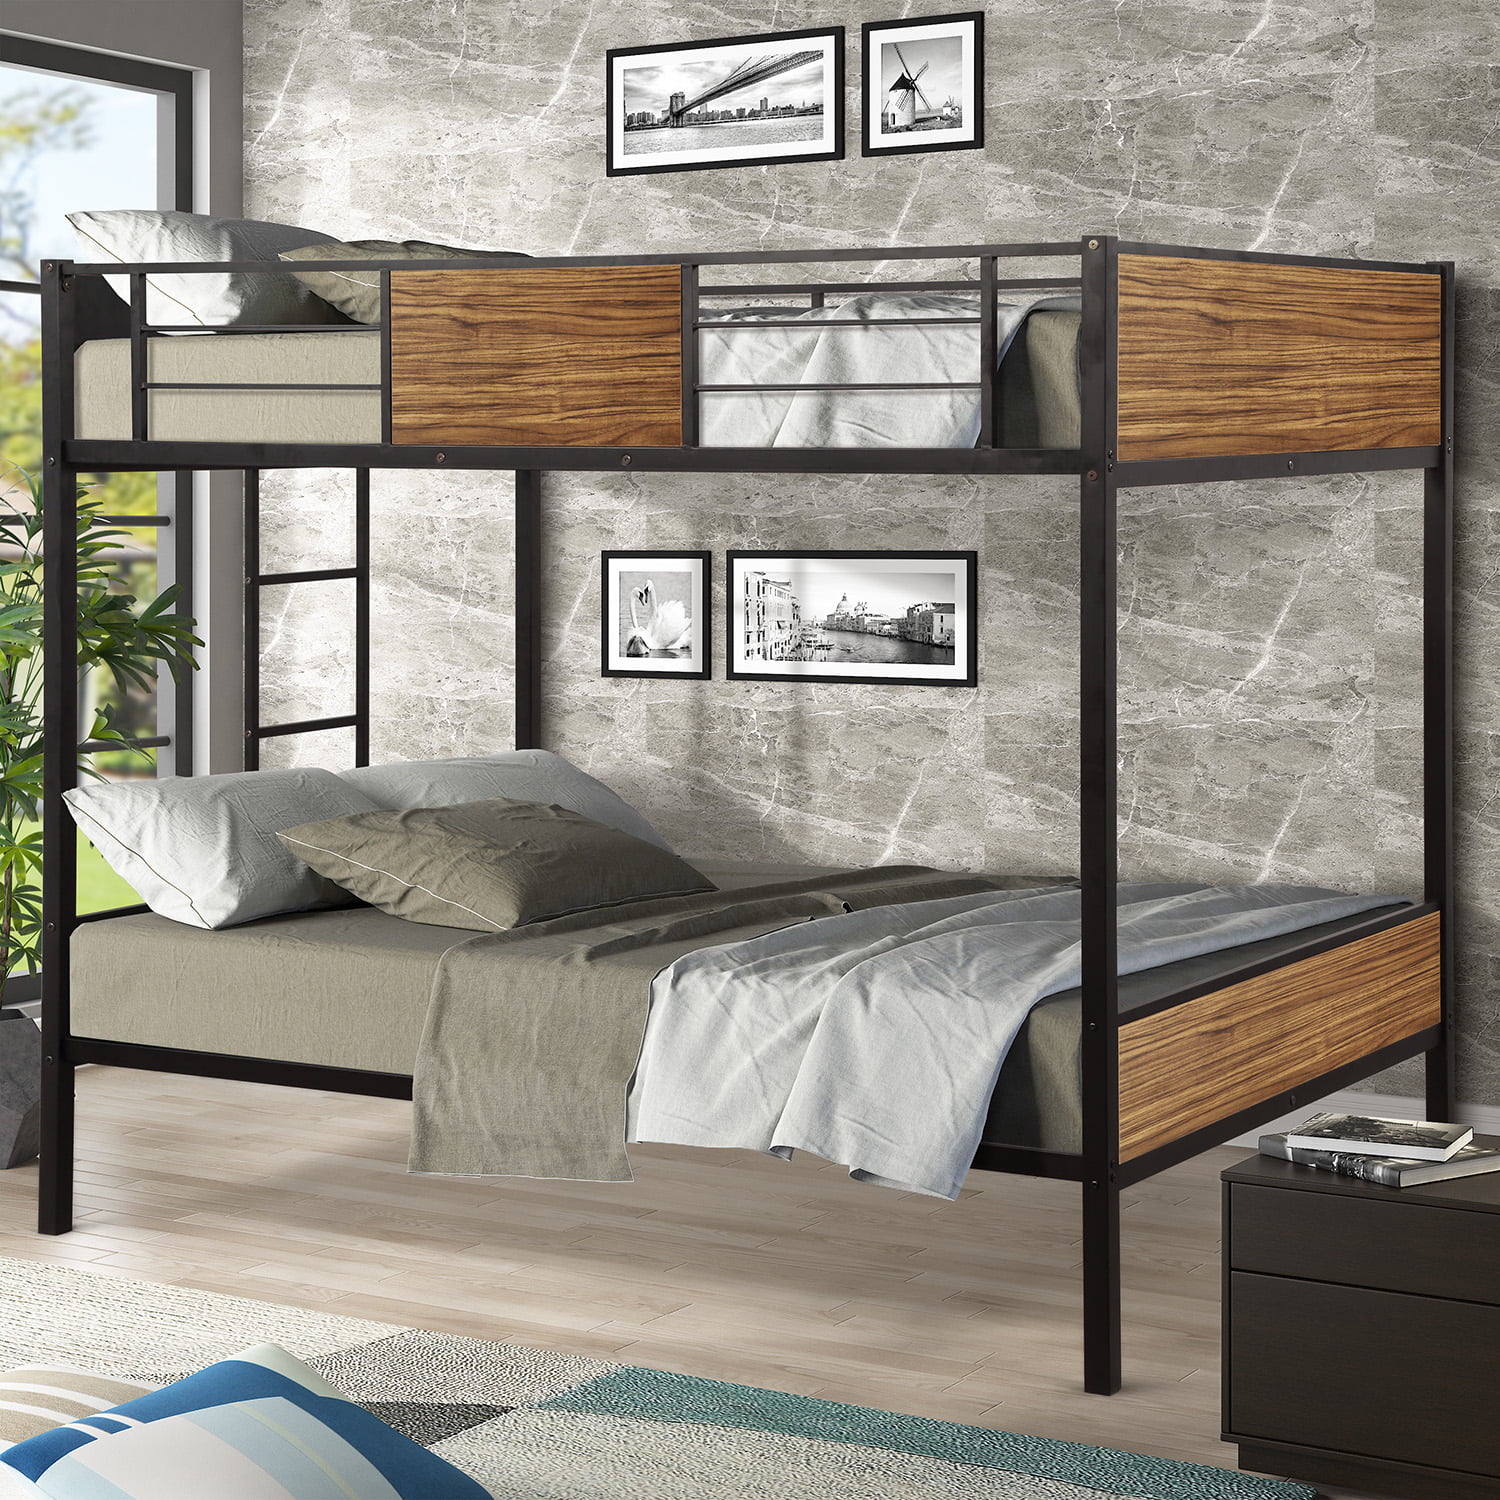 Toyosun Twin Over Modern Bunk Bed, Contemporary Bunk Beds